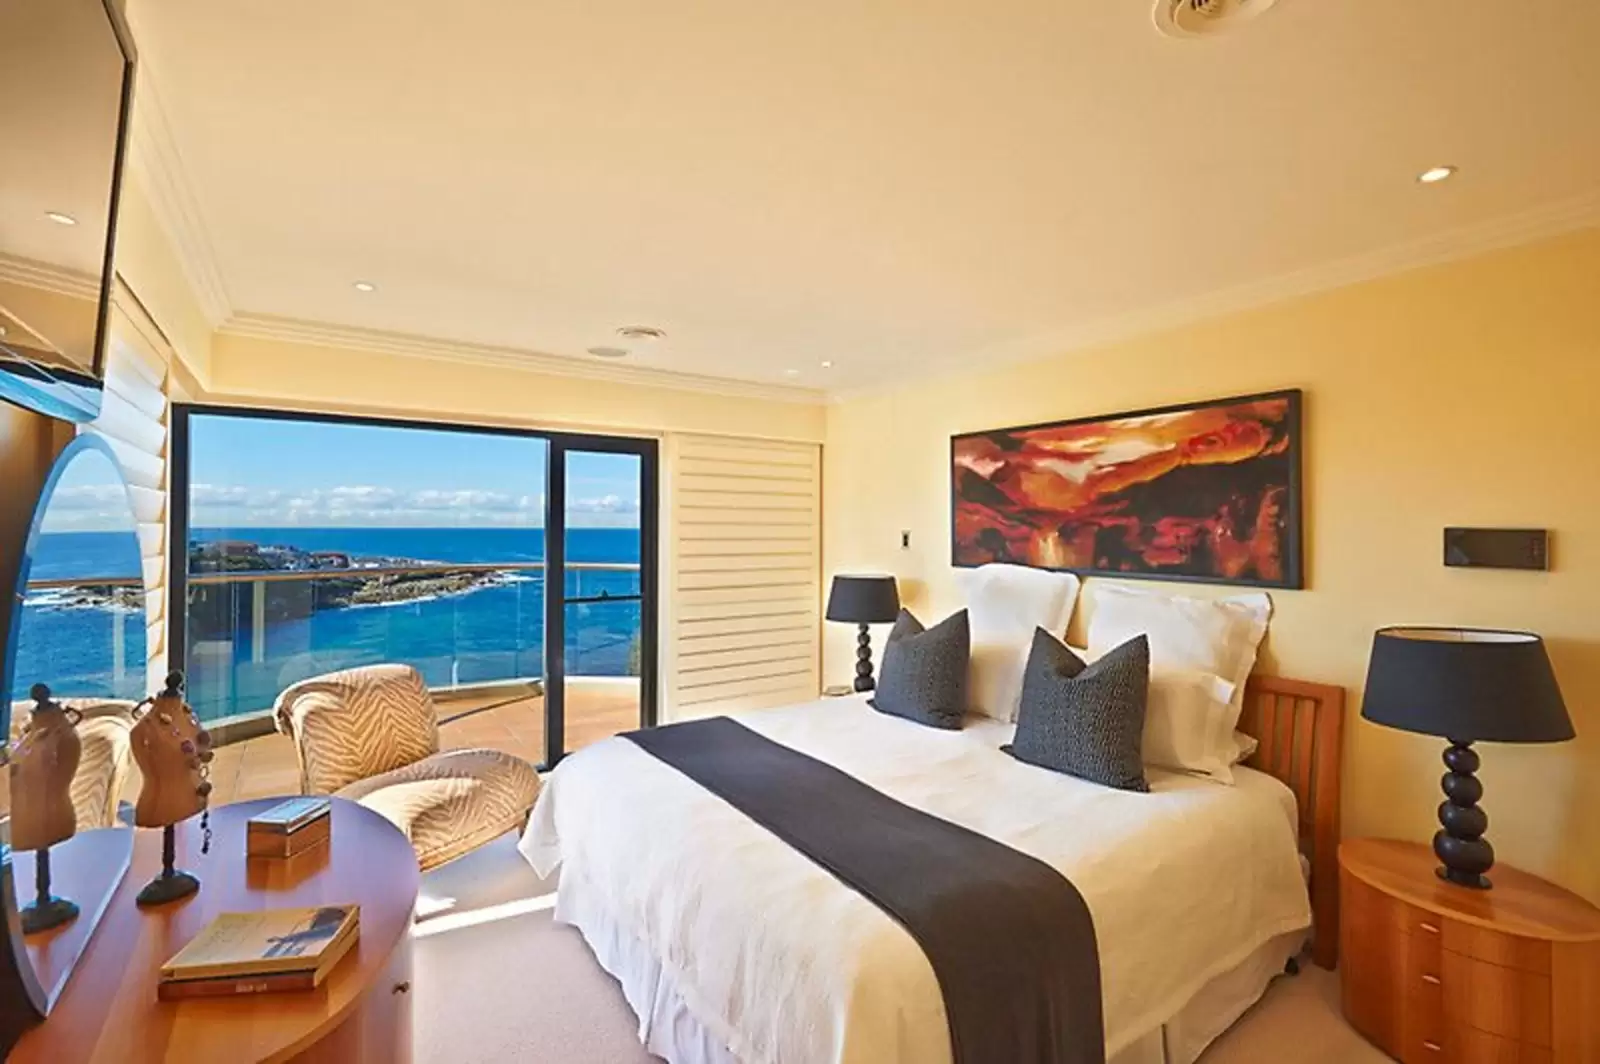 Photo #8: 13 Gordon Avenue, Coogee - Sold by Sydney Sotheby's International Realty